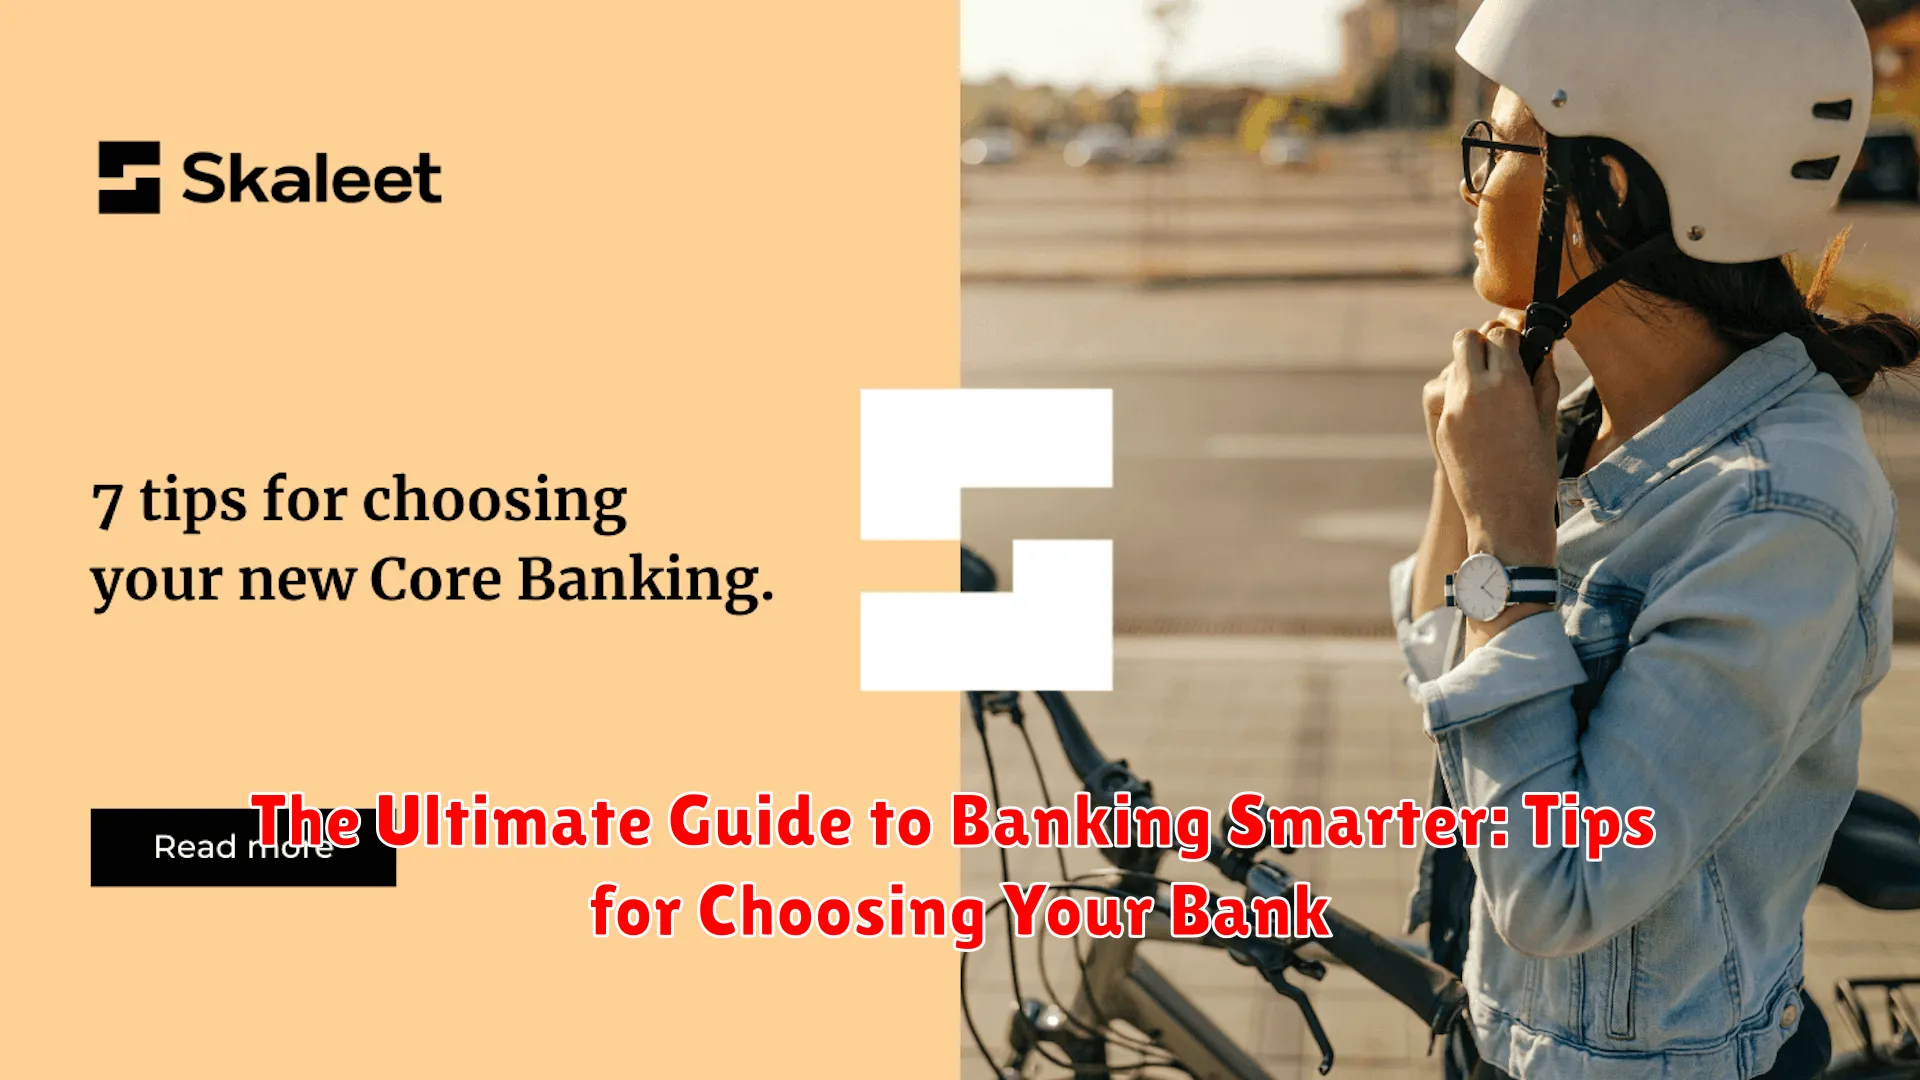 The Ultimate Guide to Banking Smarter: Tips for Choosing Your Bank